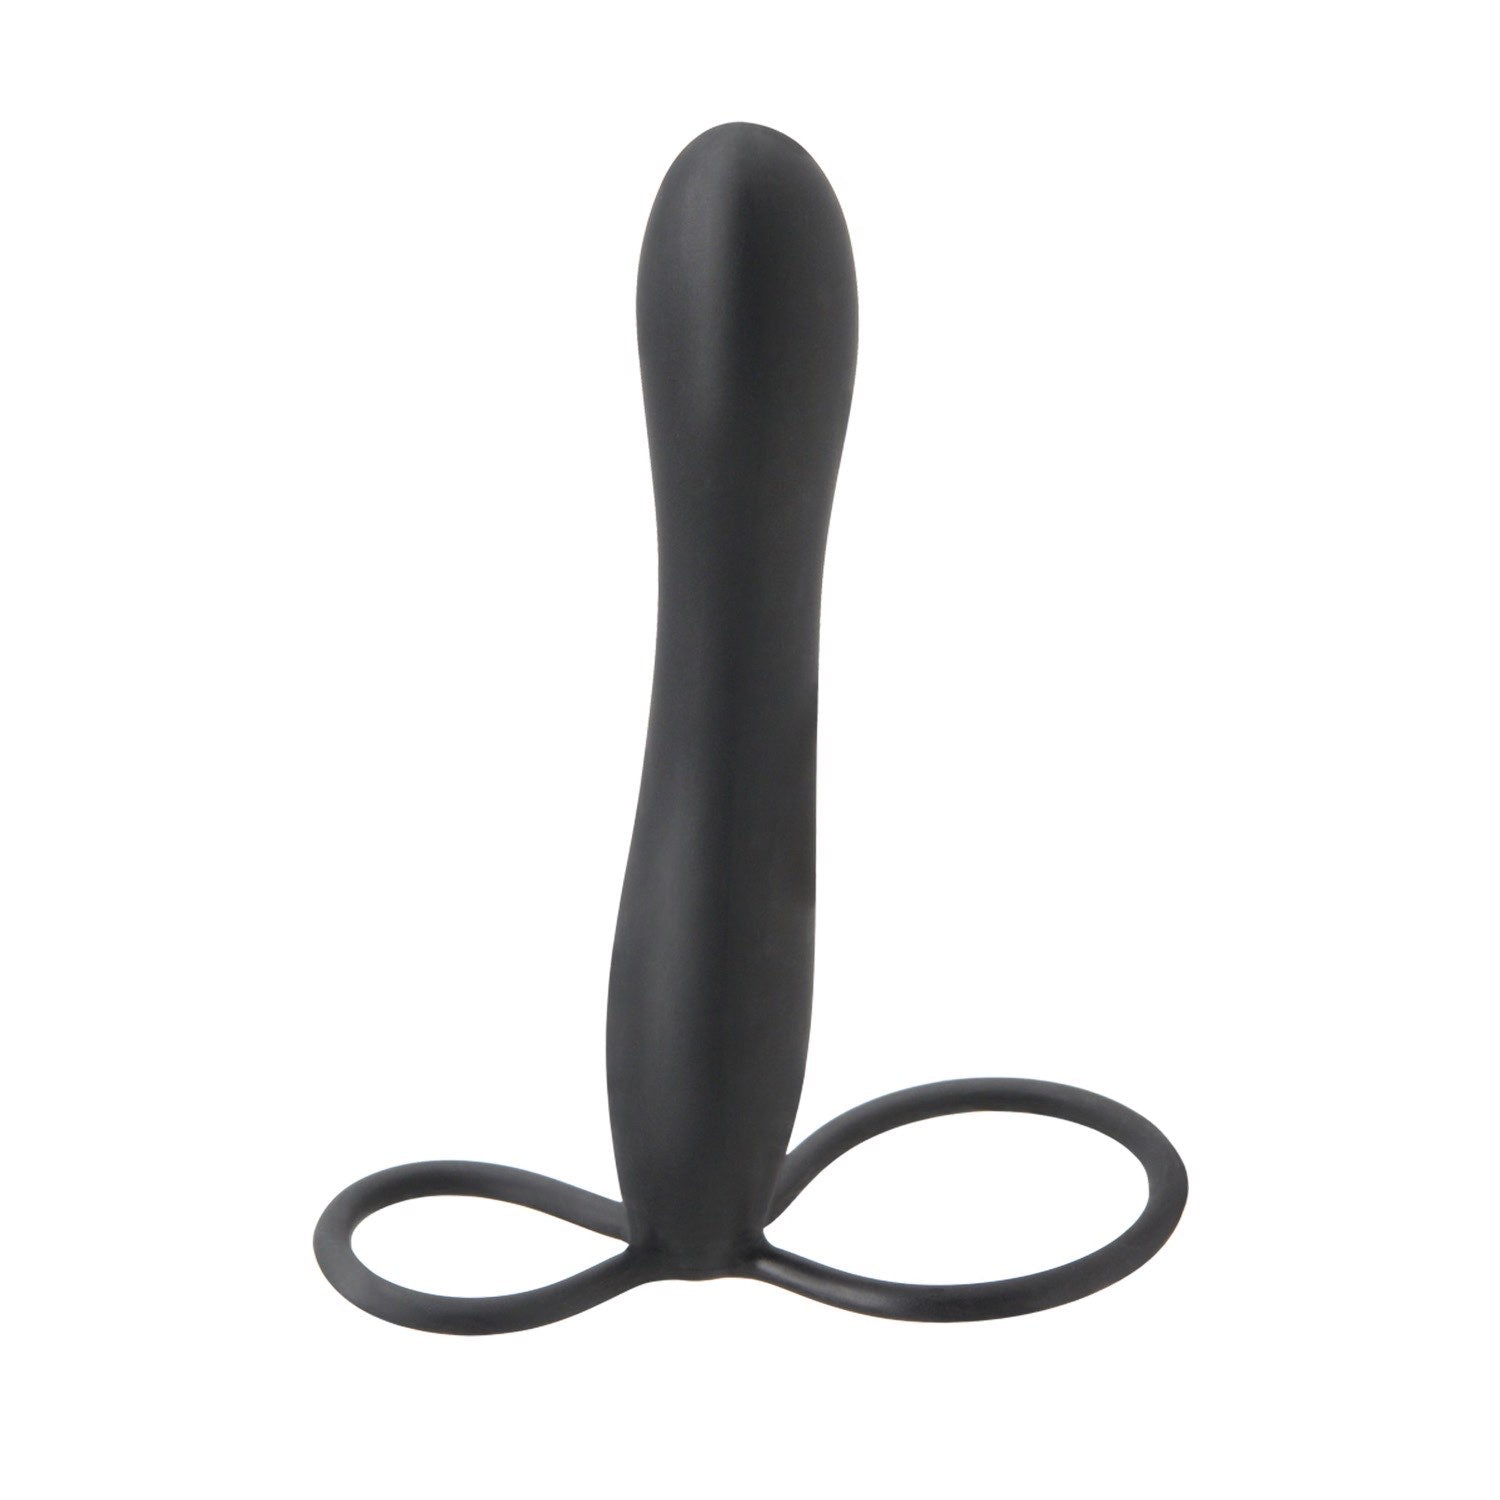 Fetish Fantasy Elite Double Trouble - Black Cock &amp; Ball Ring with Penis Attachment by Pipedream